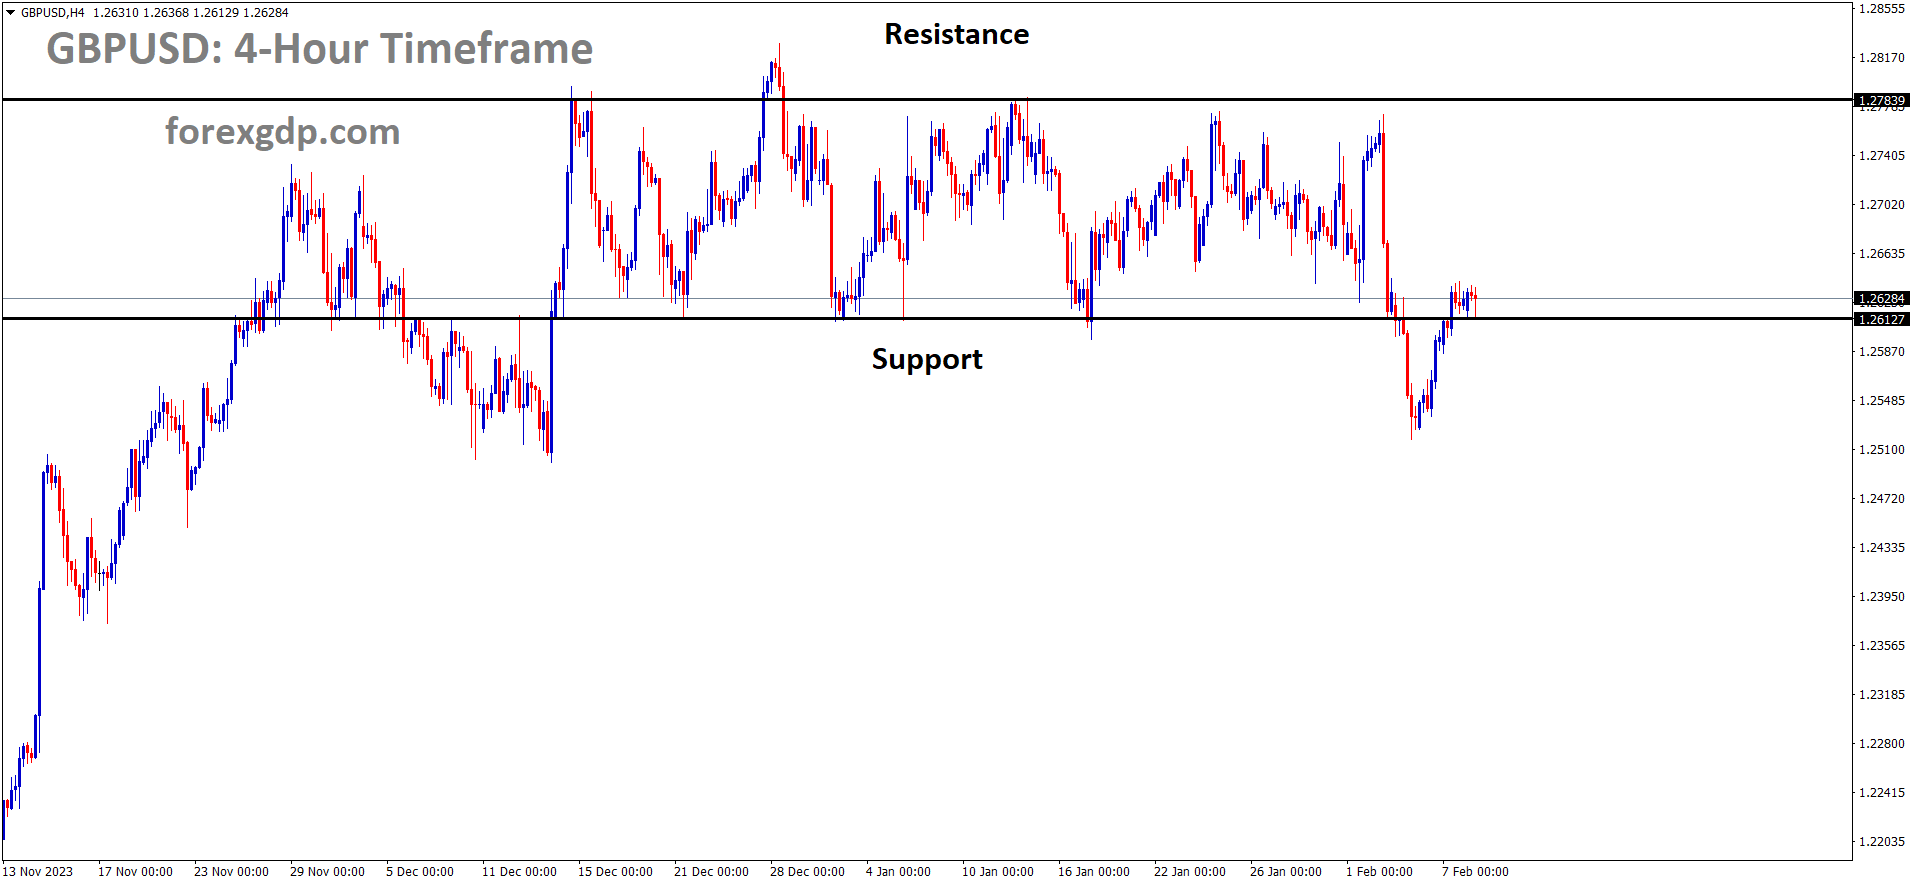 GBPUSD is moving in the Box pattern and the market has rebounded from the support area of the pattern